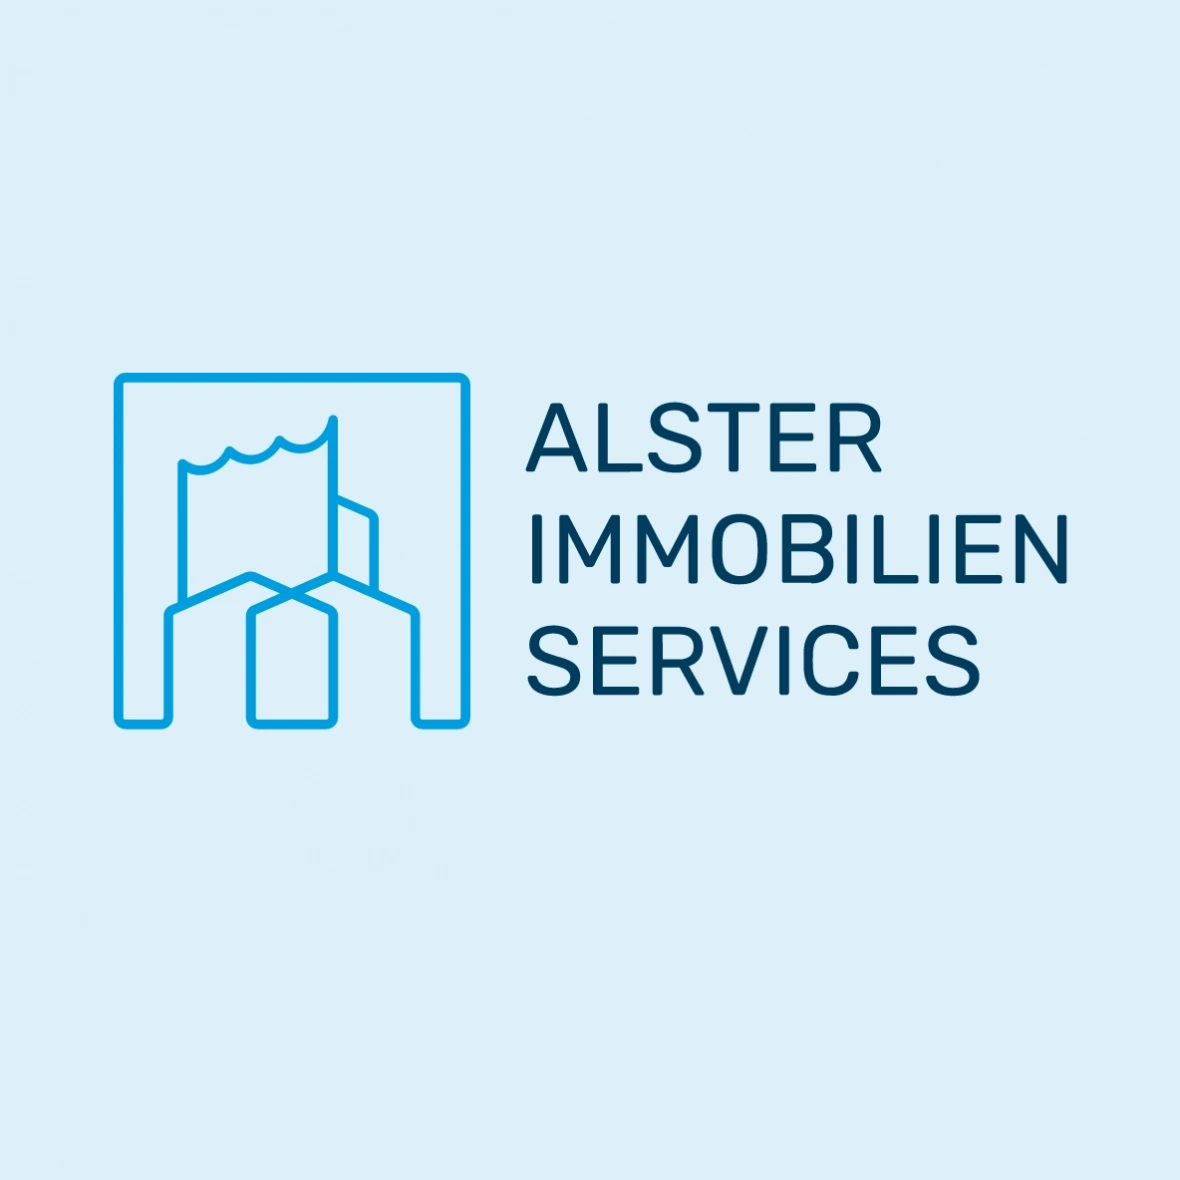 Alster Immobilienservices Branding